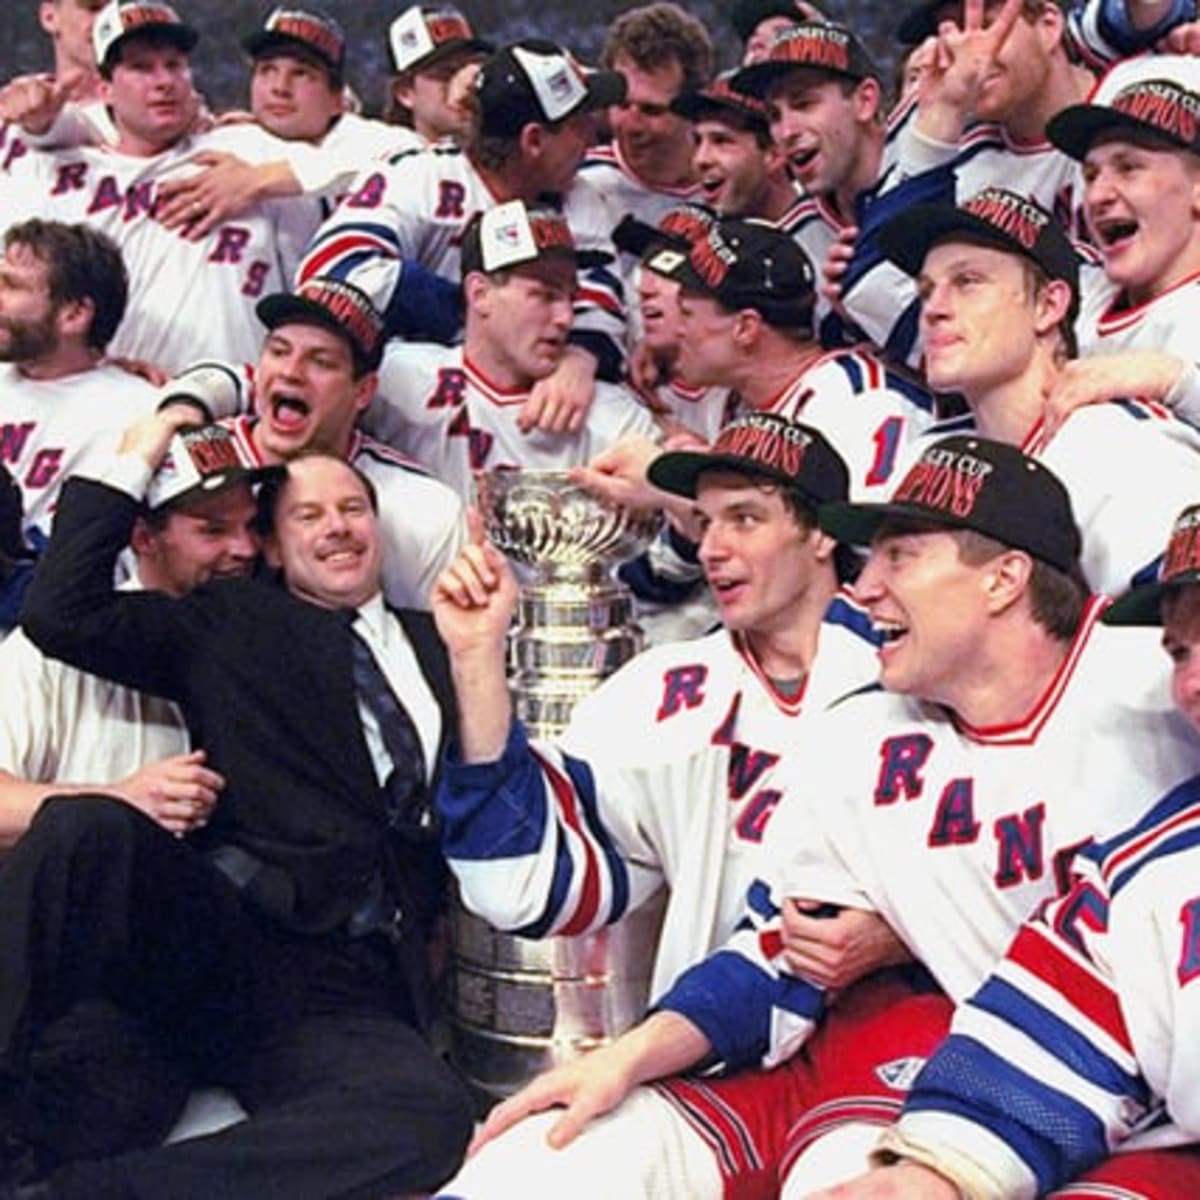 What if … NY Rangers didn't win 1994 Stanley Cup? (NHL Alternate History)